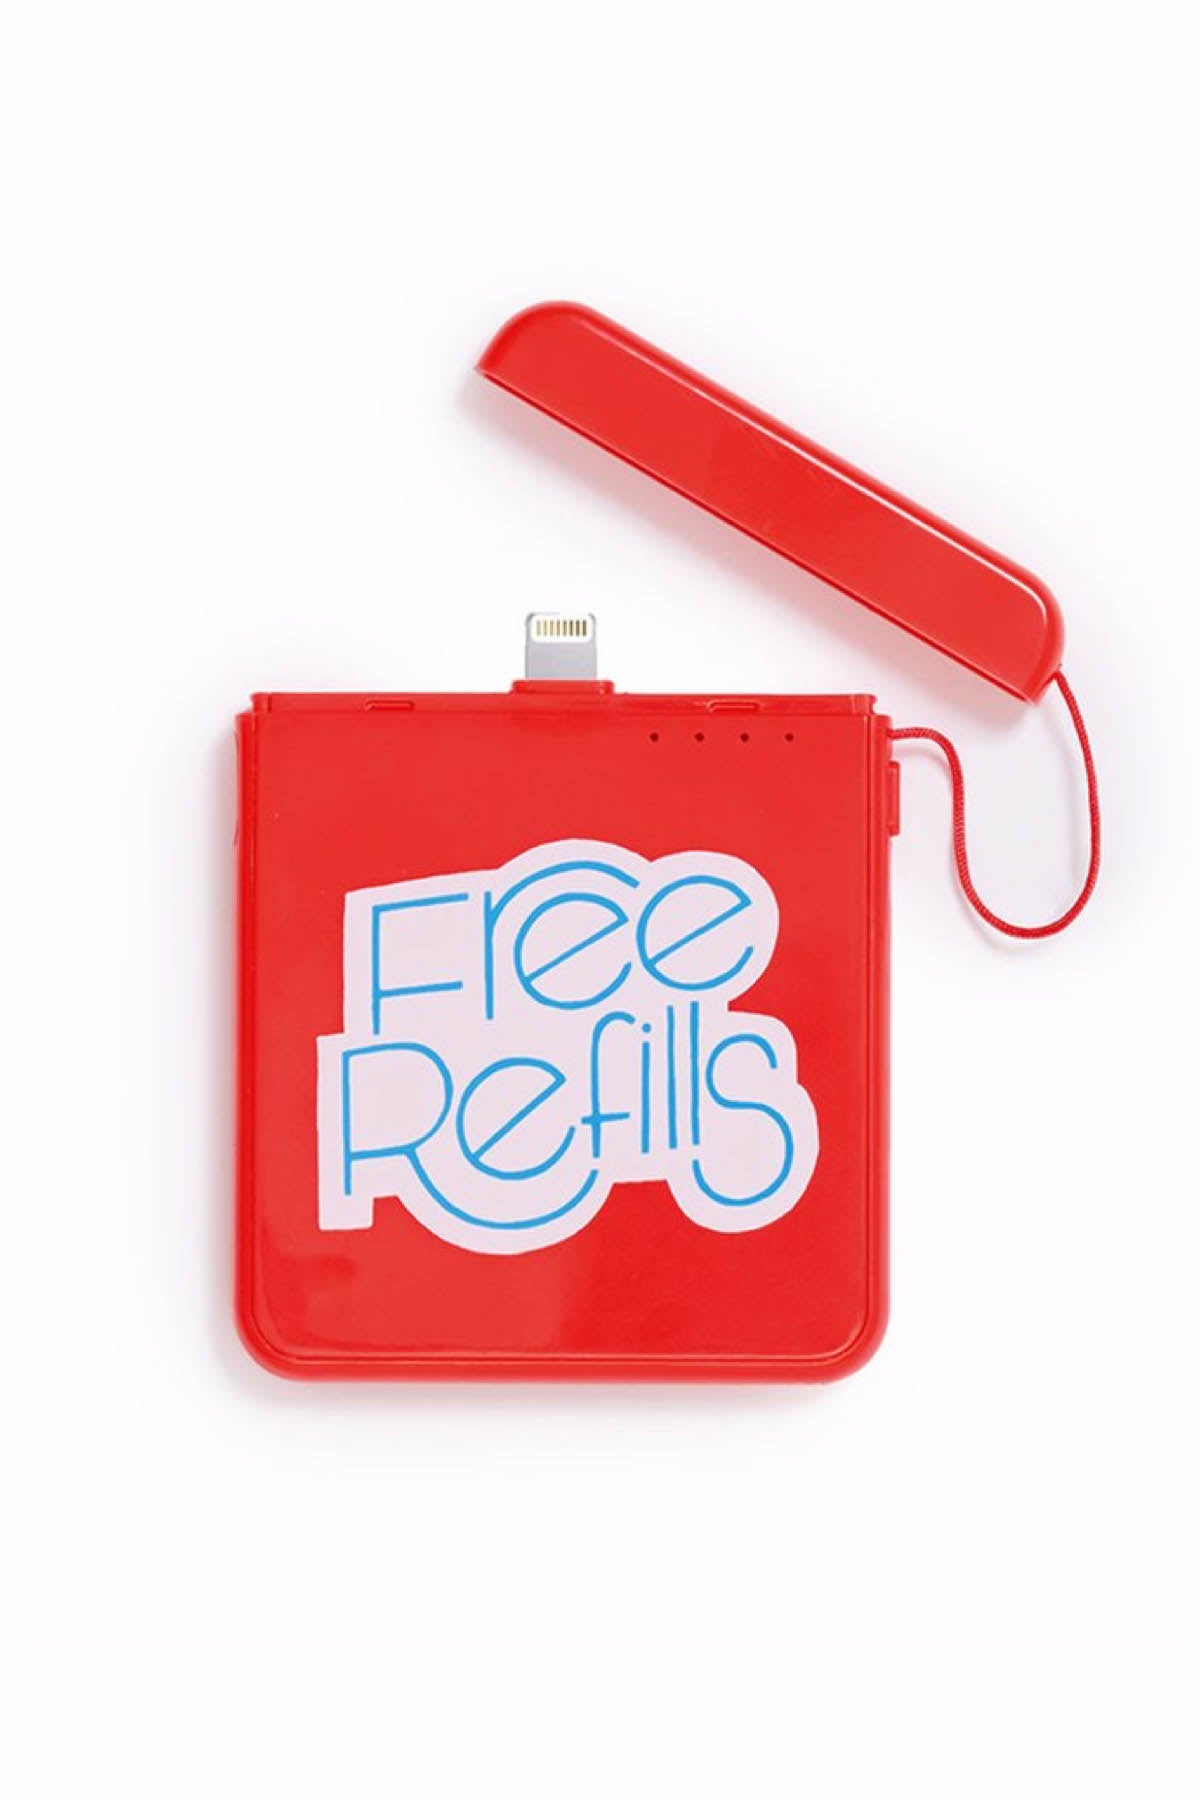 Ban.do Free Refills Mobile iPhone Charger